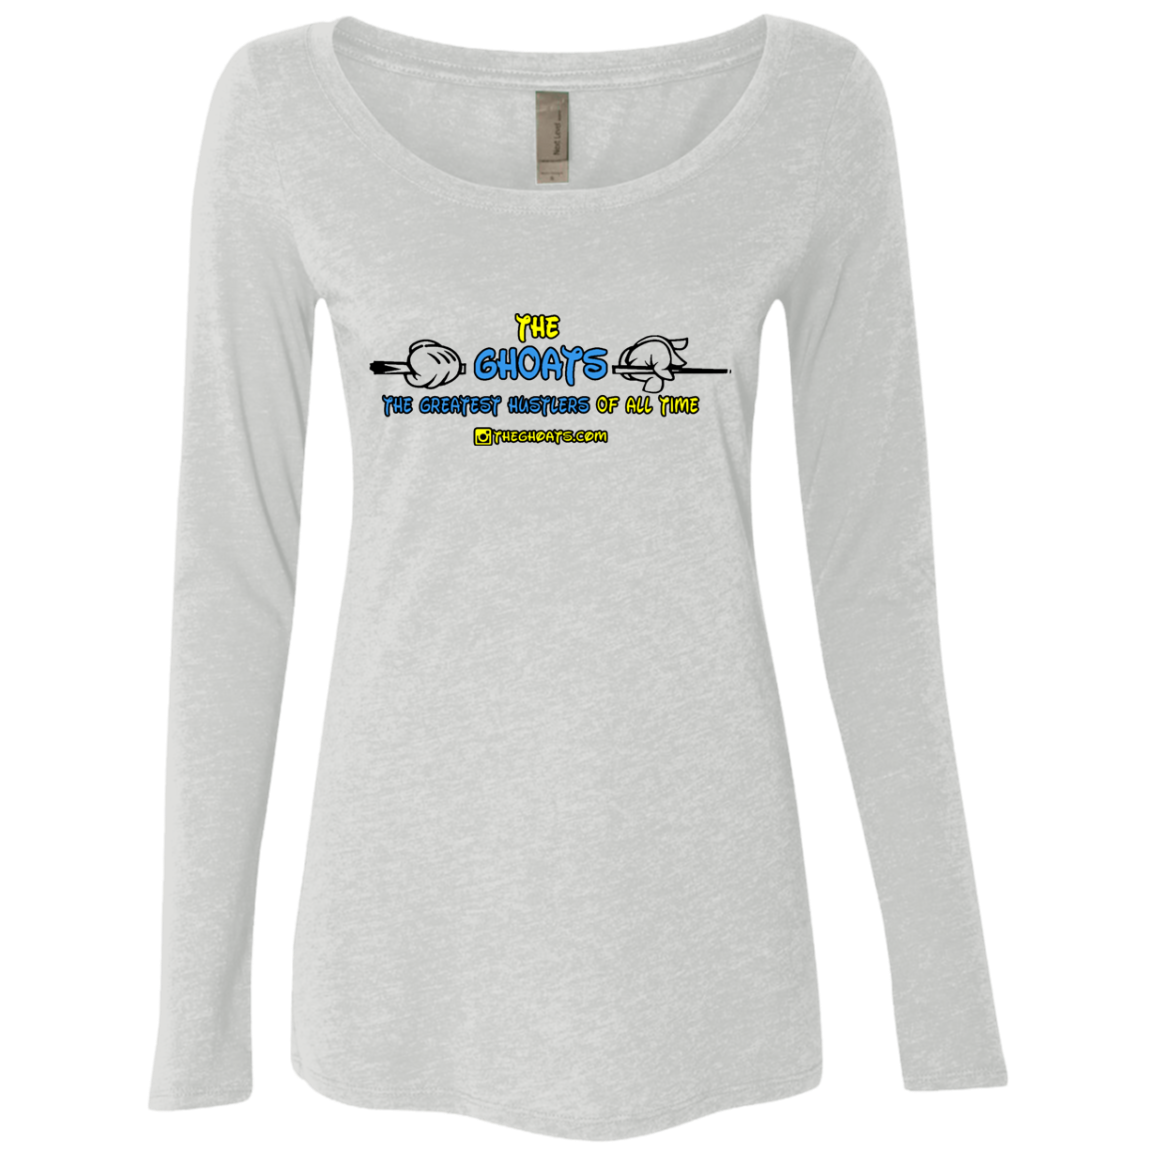 The GHOATS custom design #14. The Happiest Place On Earth. Fan Art. Ladies' Triblend LS Scoop